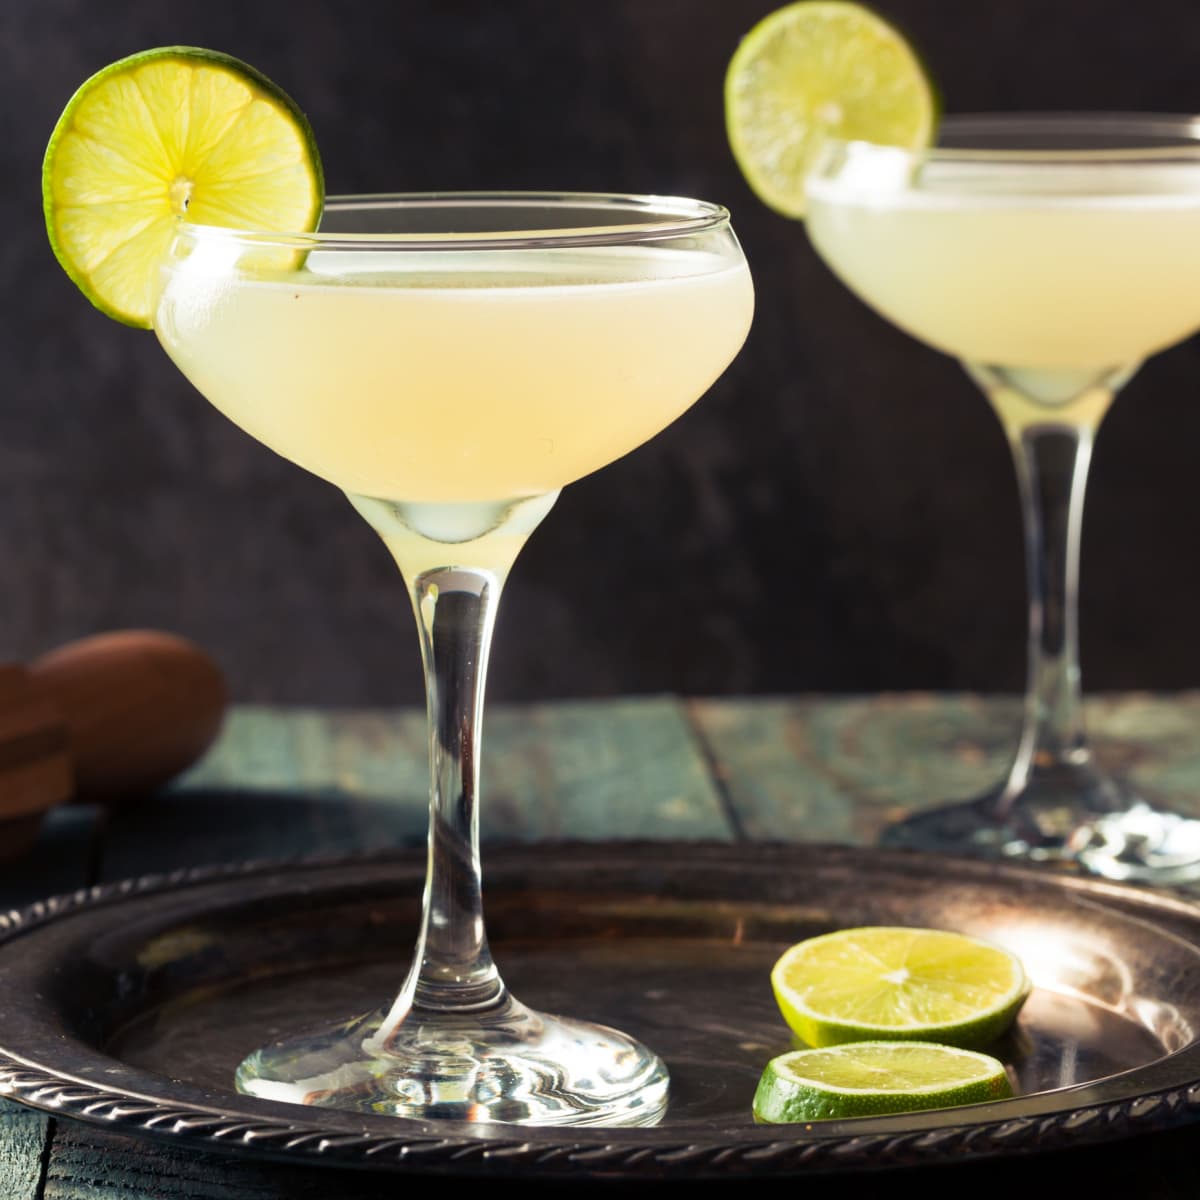 Two Glasses of Refreshing Daiquiri Cocktails, One on a Serving Tray with Lime Wheels